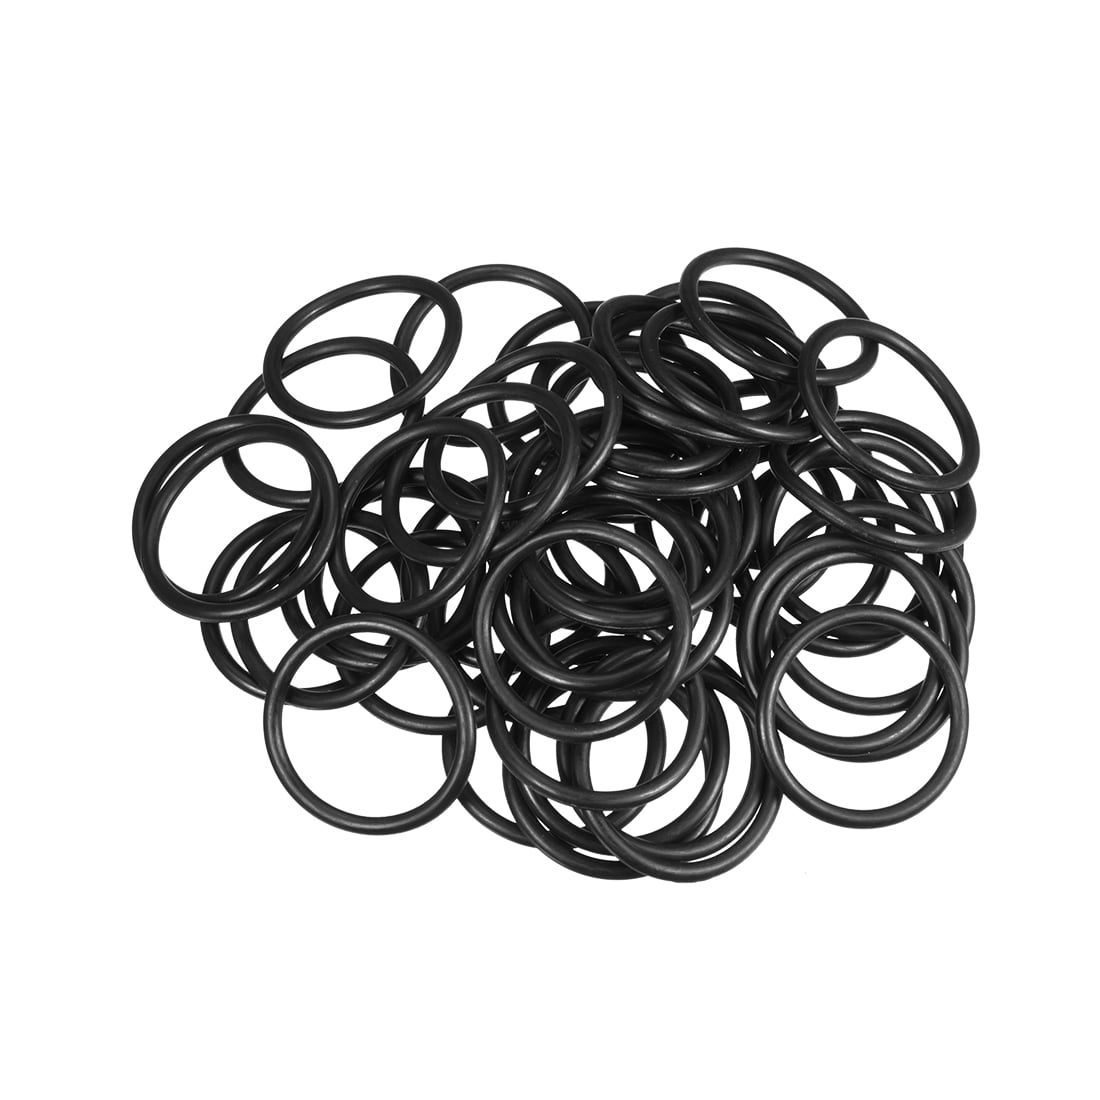 50 Pieces Rubber Oring O Ring 37mm x 32mm x 2.5mm or 1.5" Pool Valve Cover 